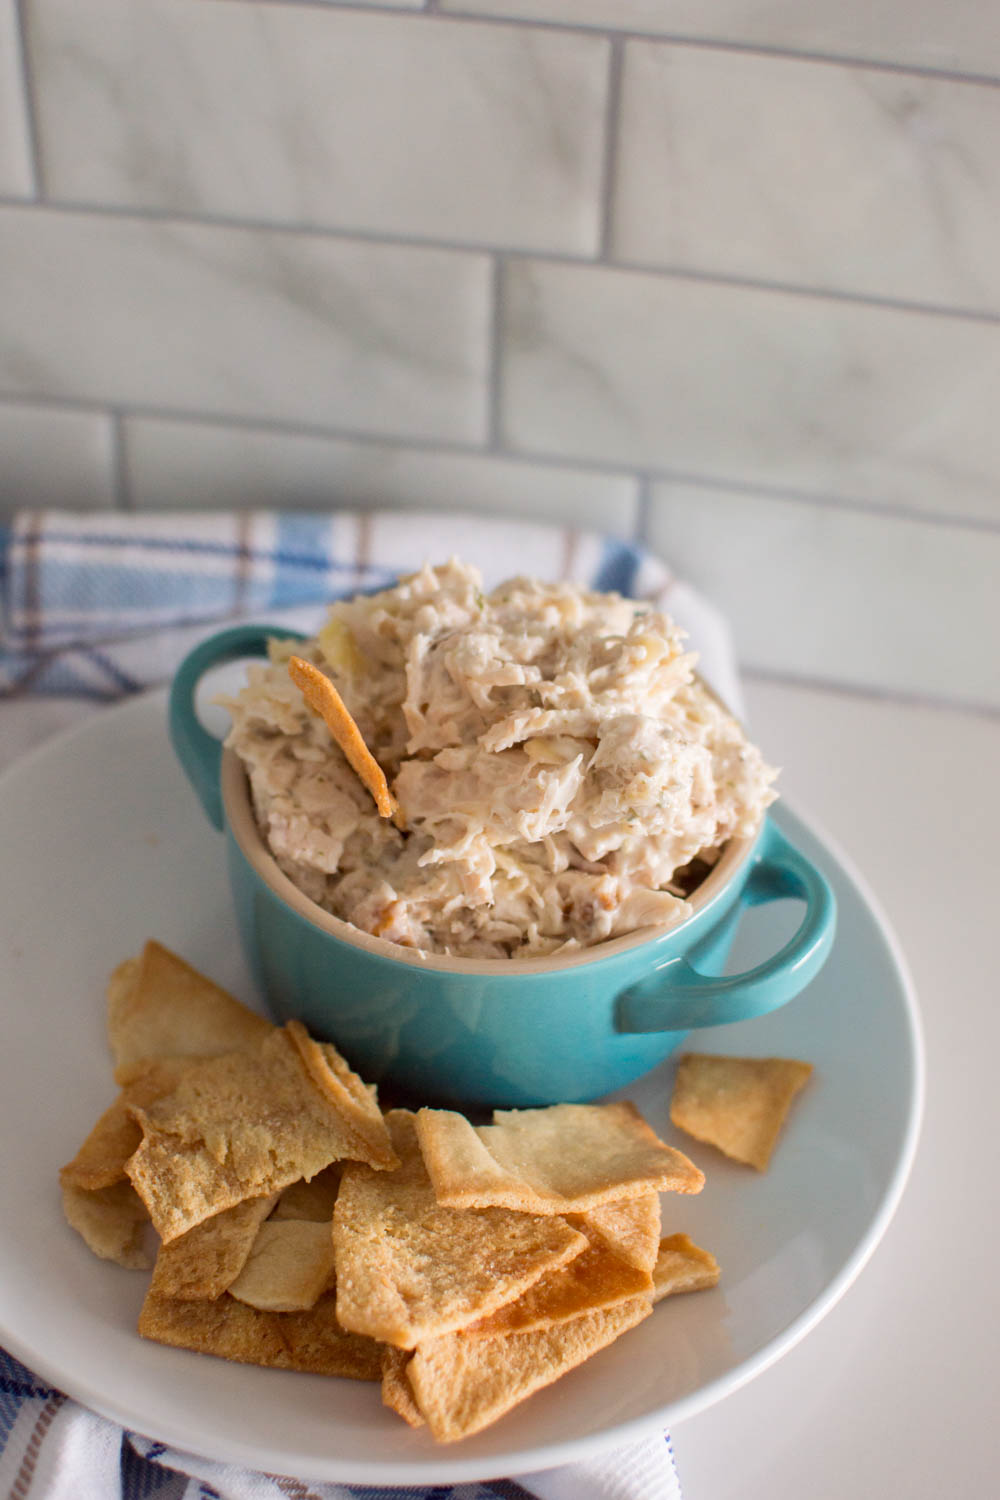 Chicken salad in a turquoise bowl, on a white plate and surrounded by pita chips